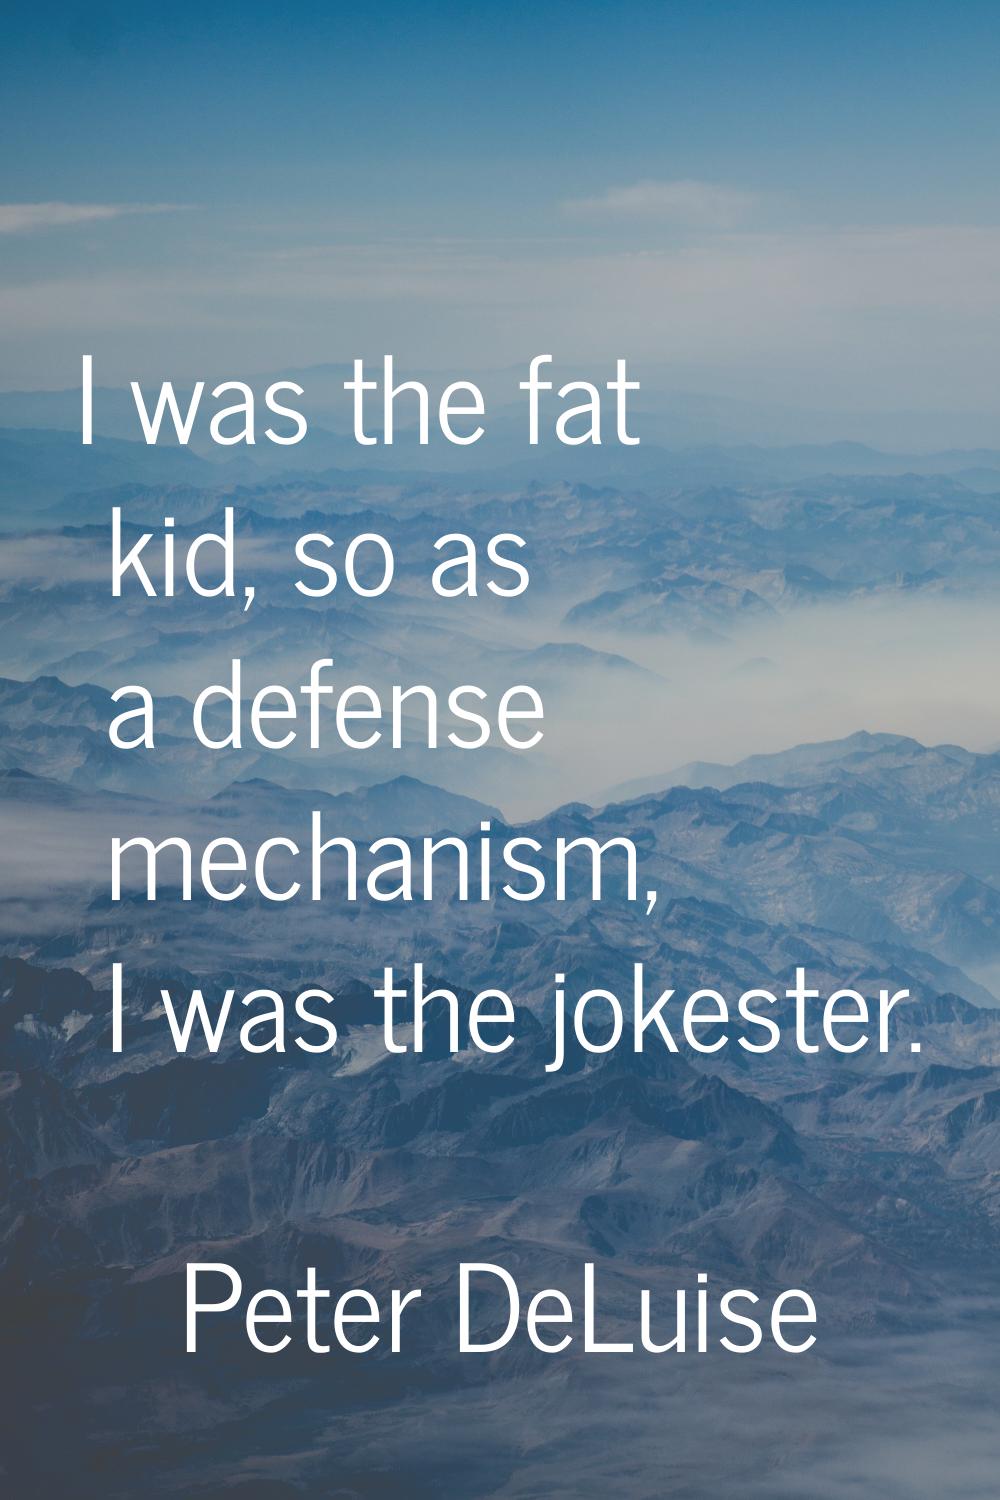 I was the fat kid, so as a defense mechanism, I was the jokester.